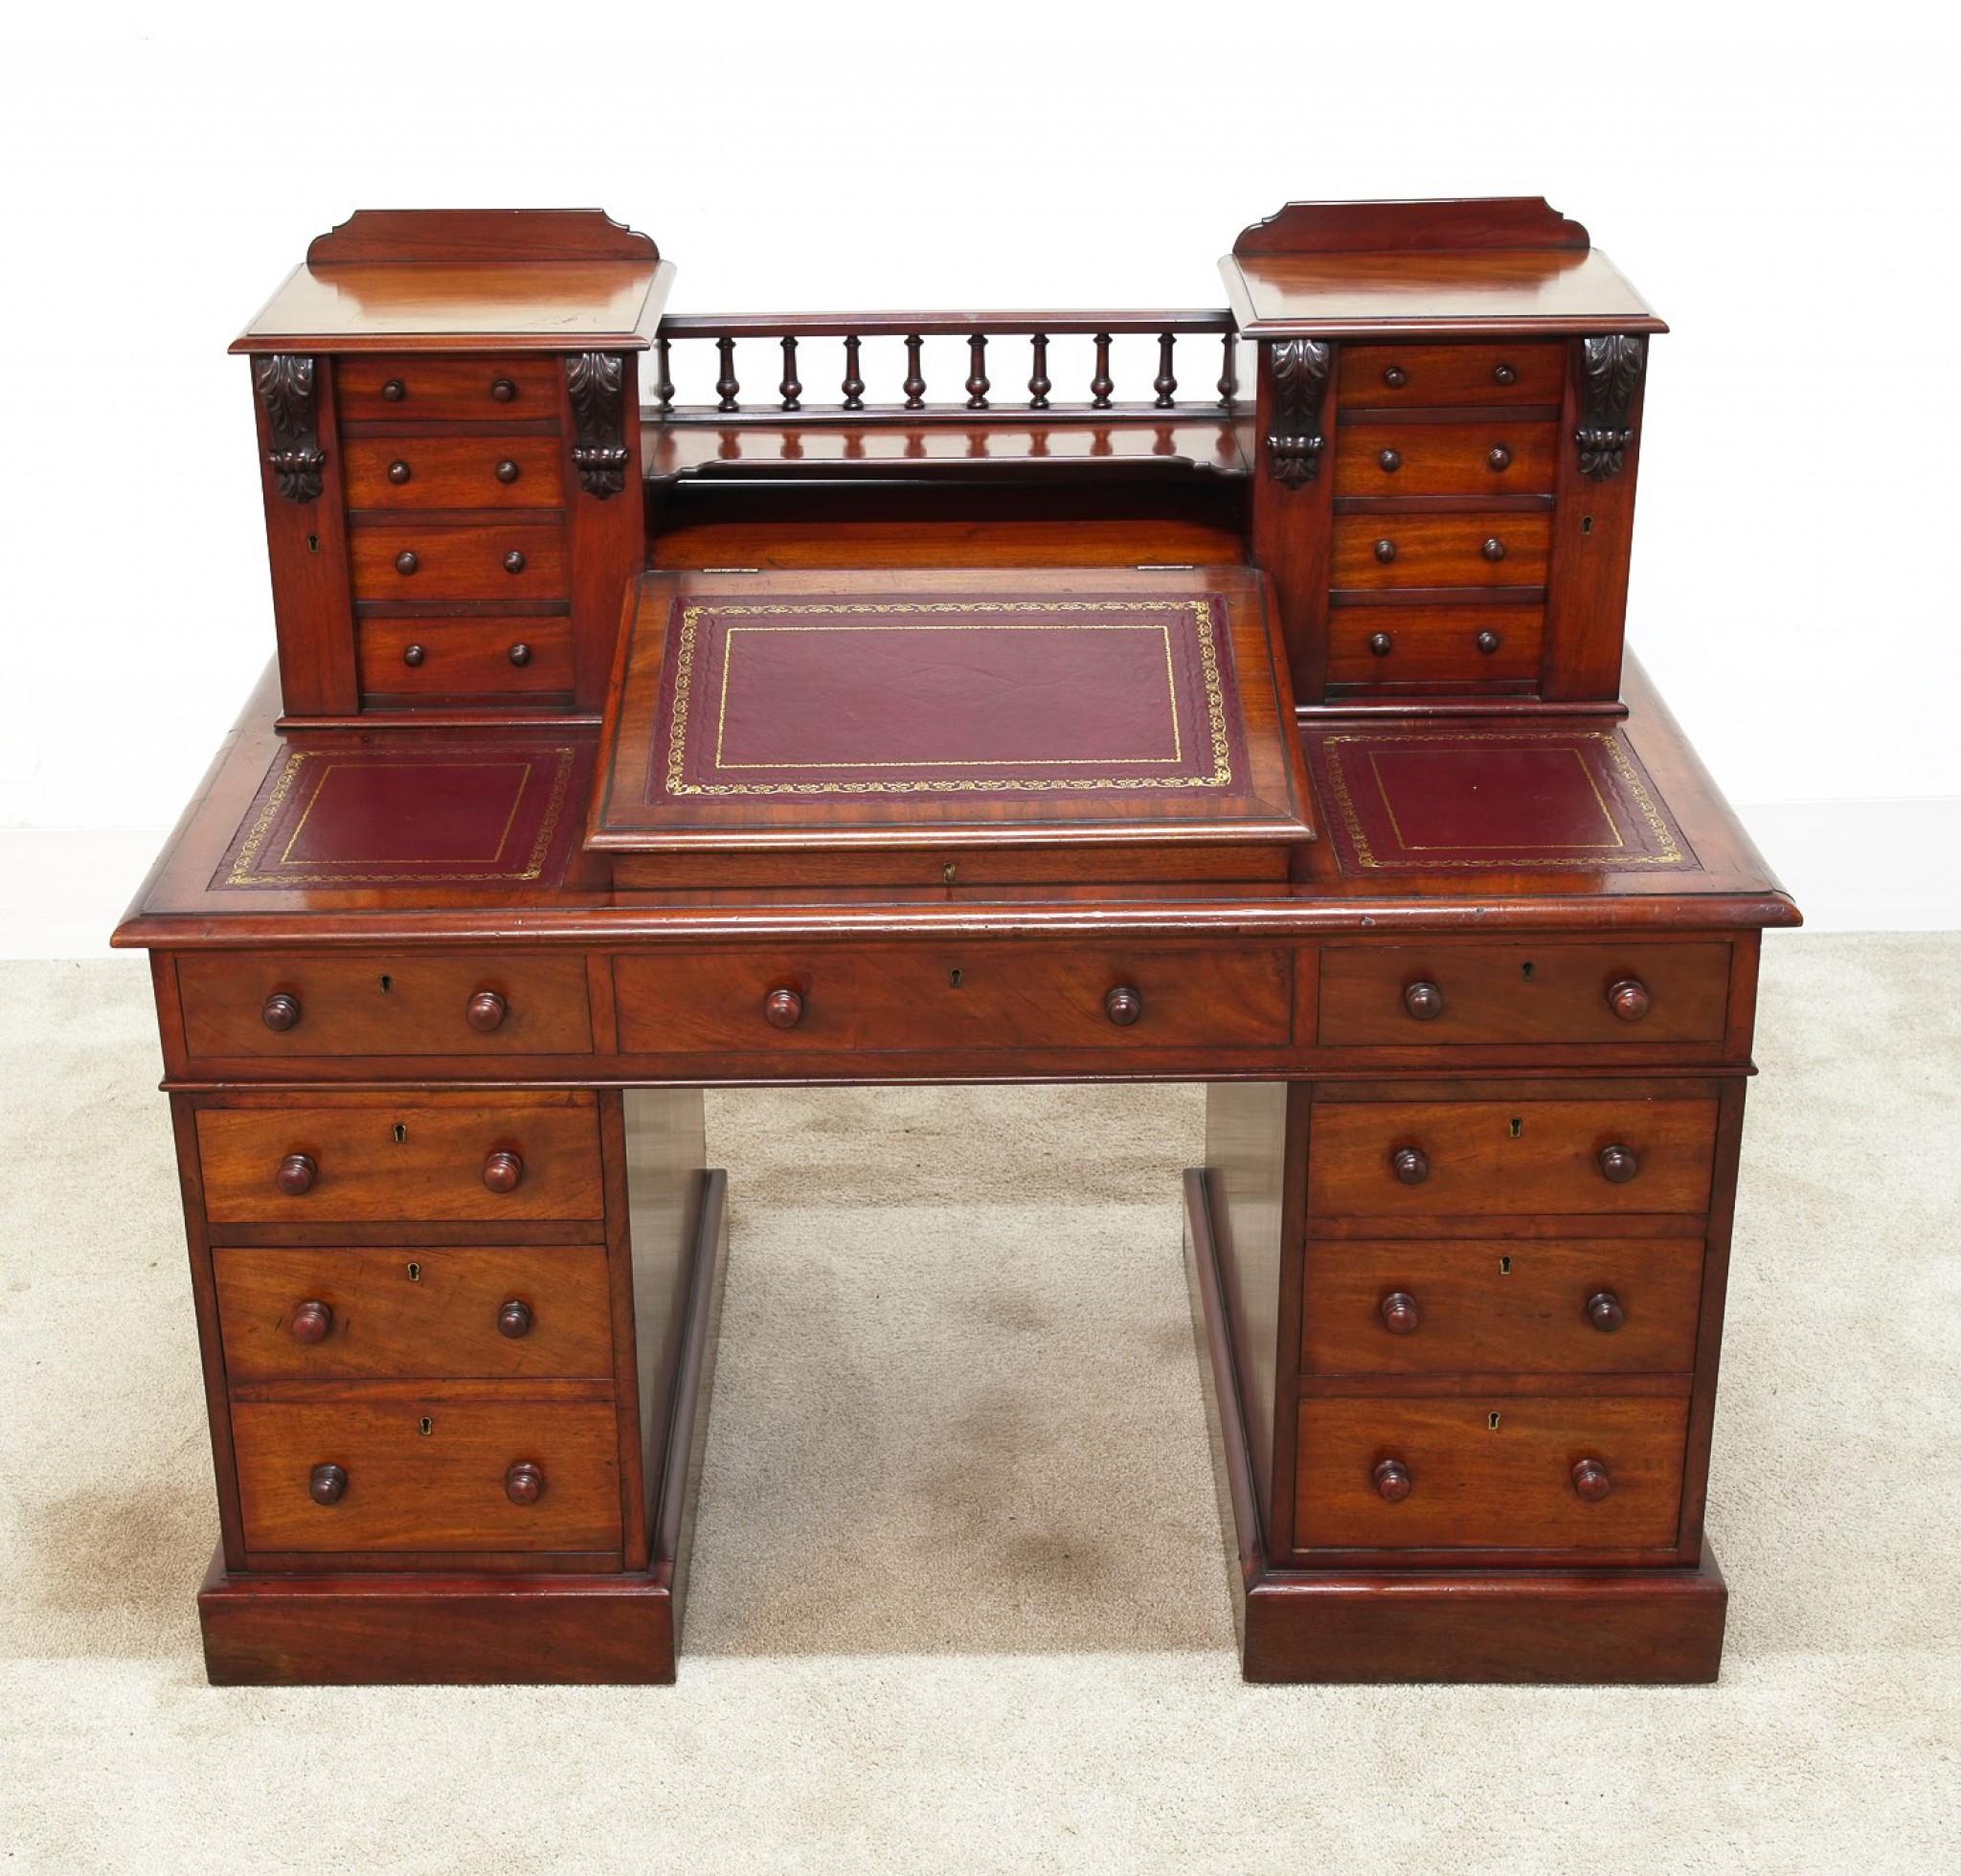 Wonderful period Victorian 'Dickens Desk' in mahogan
The desk is modelled after the same type of pedestal desk Charles Dicken's used to write classics such as 'Oliver Twist' and 'Great expectations
Hand crafted from mahogany with a wonderful patina